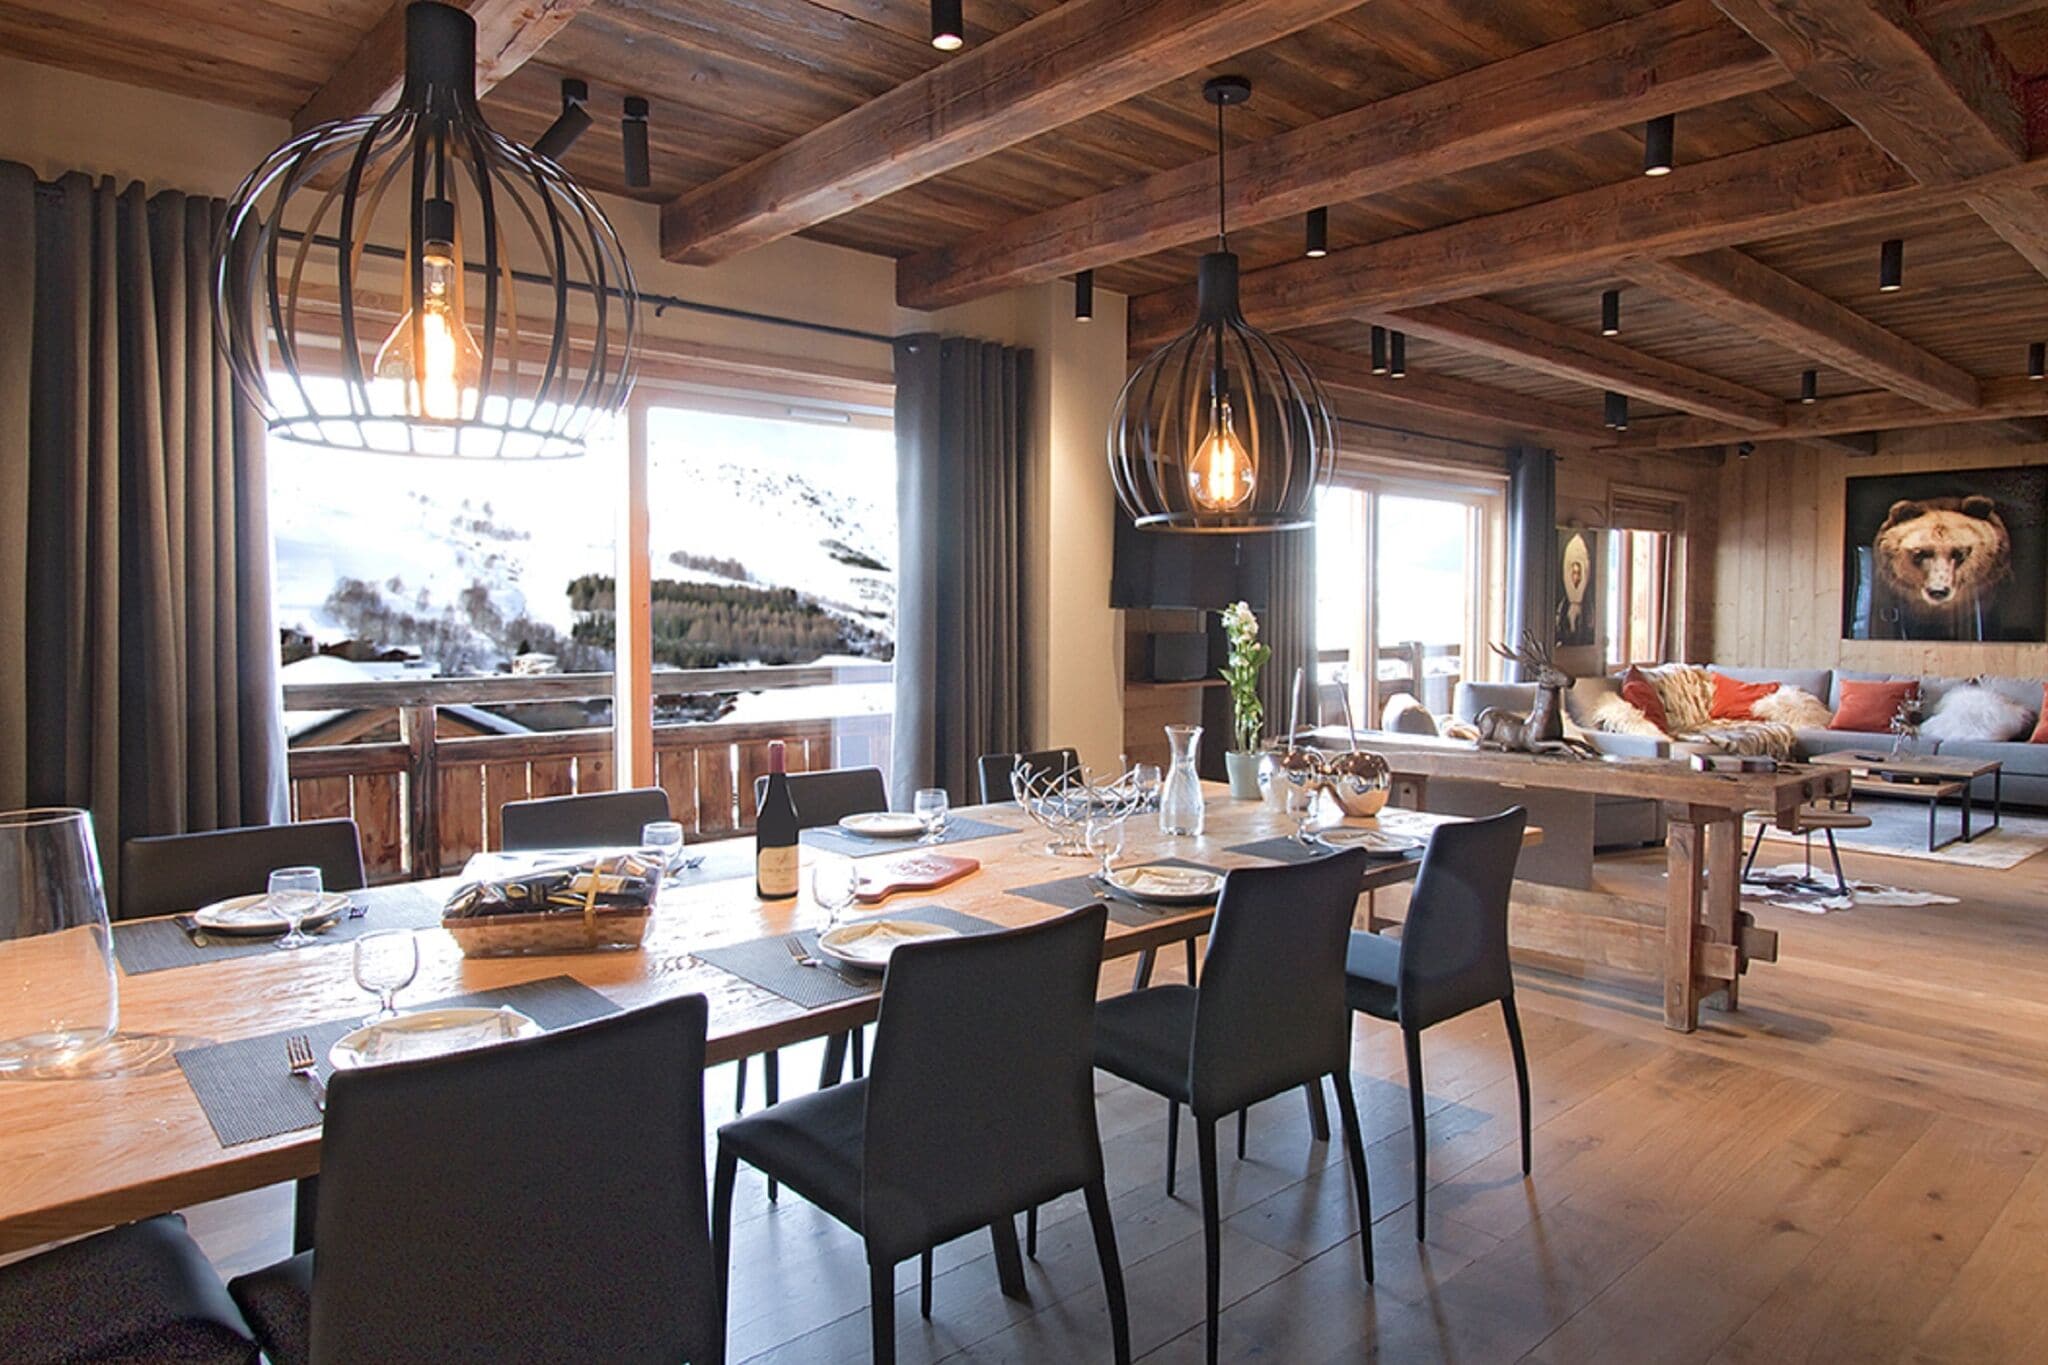 Spacious 14-person chalet with indoor pool in Les Deux Alpes